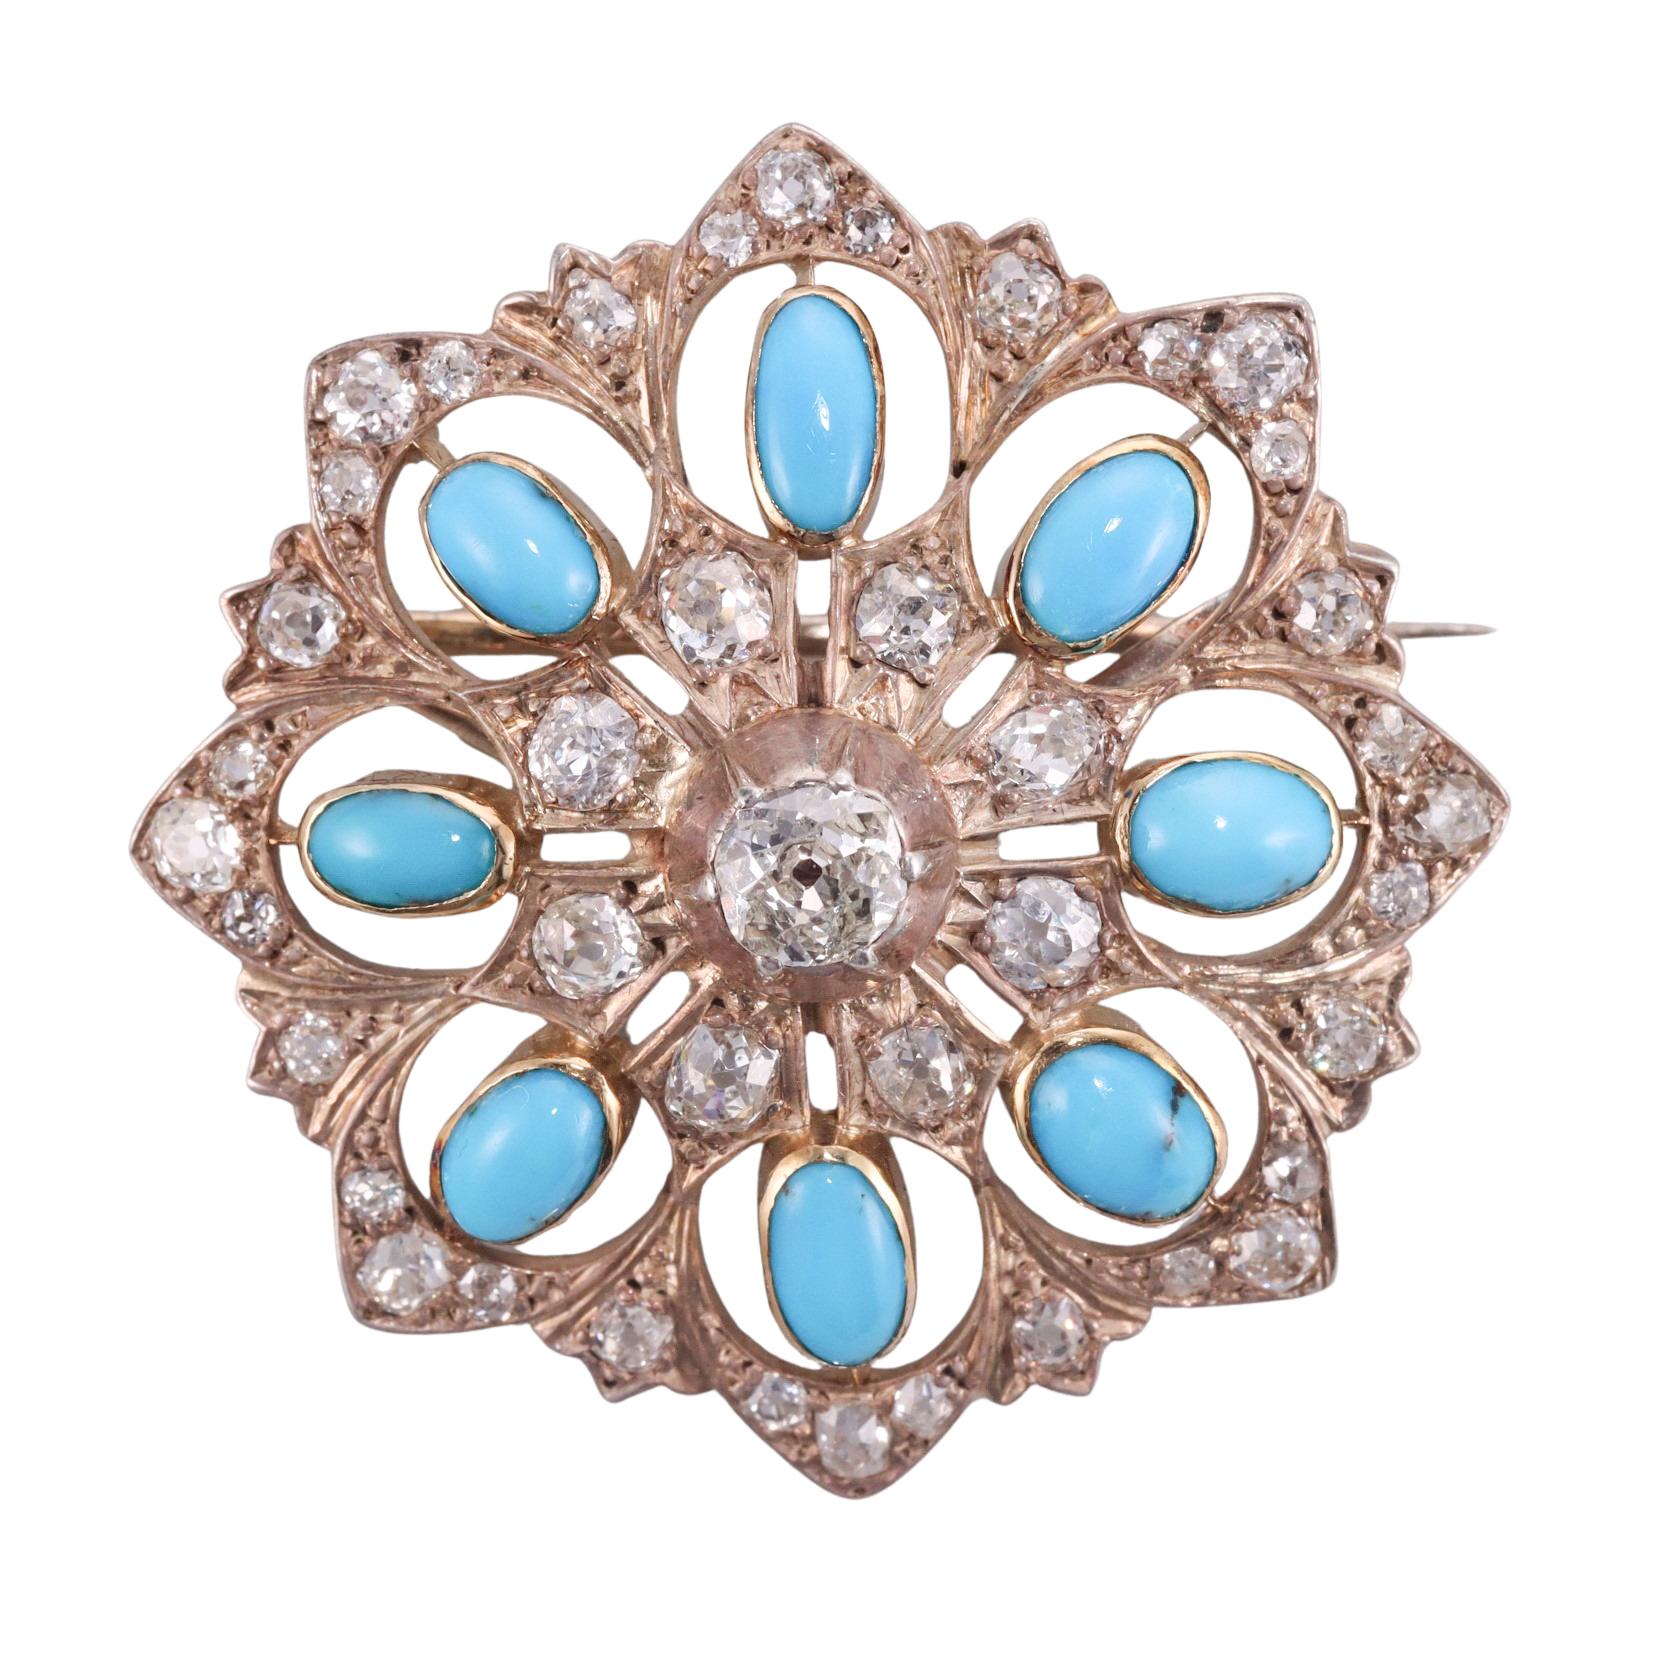 Antique 14k gold brooch, set with old mine cut diamonds - approx. 3.00ctw and turquoise. Center old mine stone is approx. VS2-I stone. Brooch measures 43mm x  43mm. Tested 14k, not marked. Weighs 18.2 grams. 